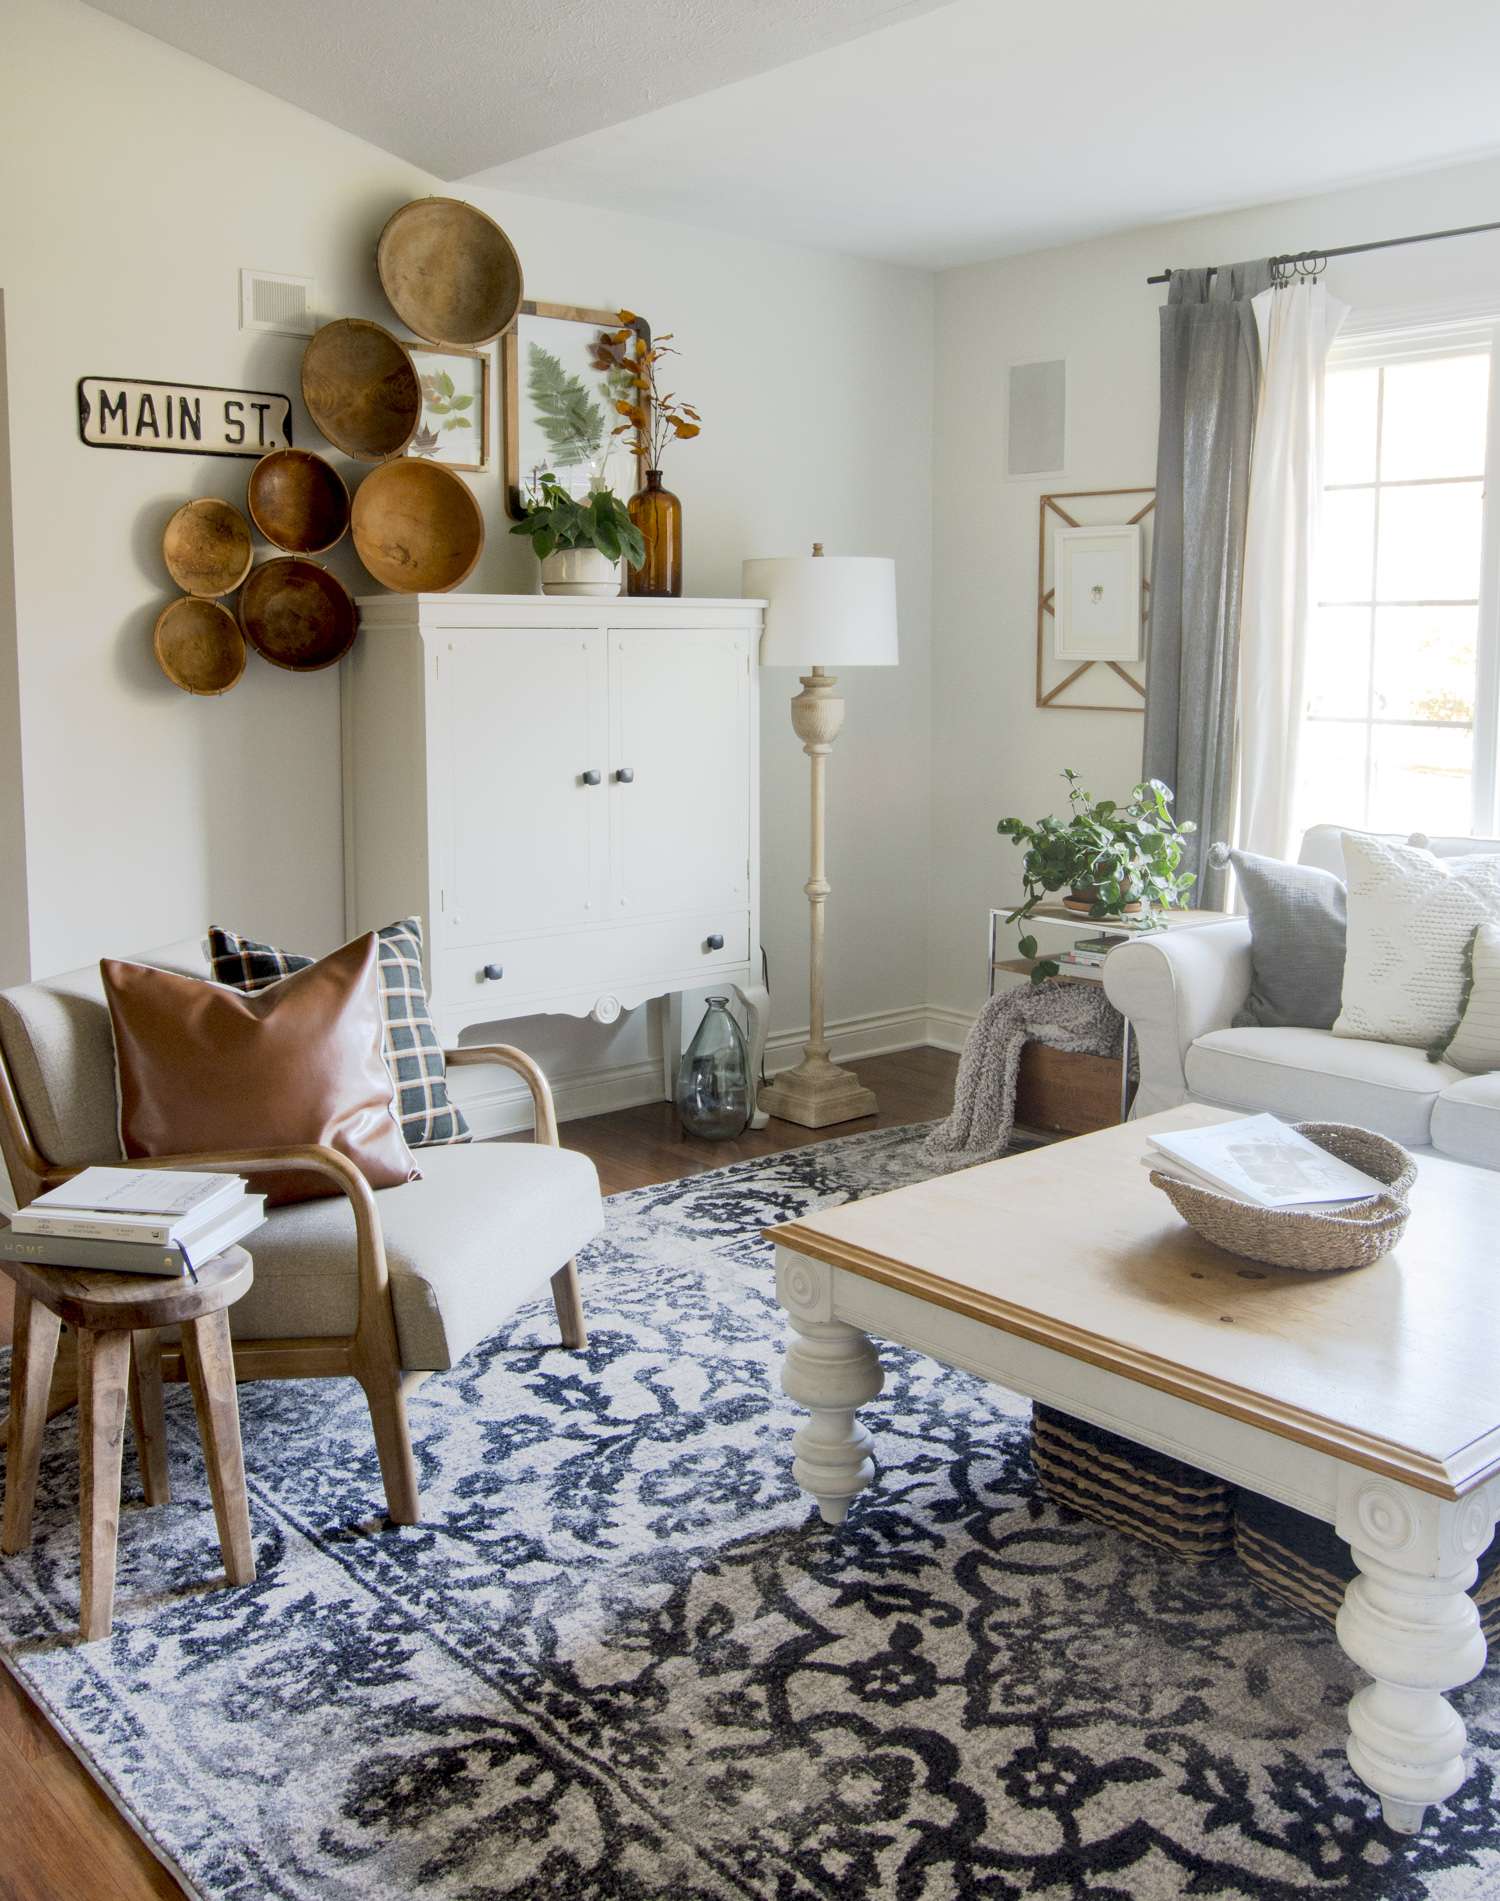 Designer Rugs on a Budget: Finding Quality and Style